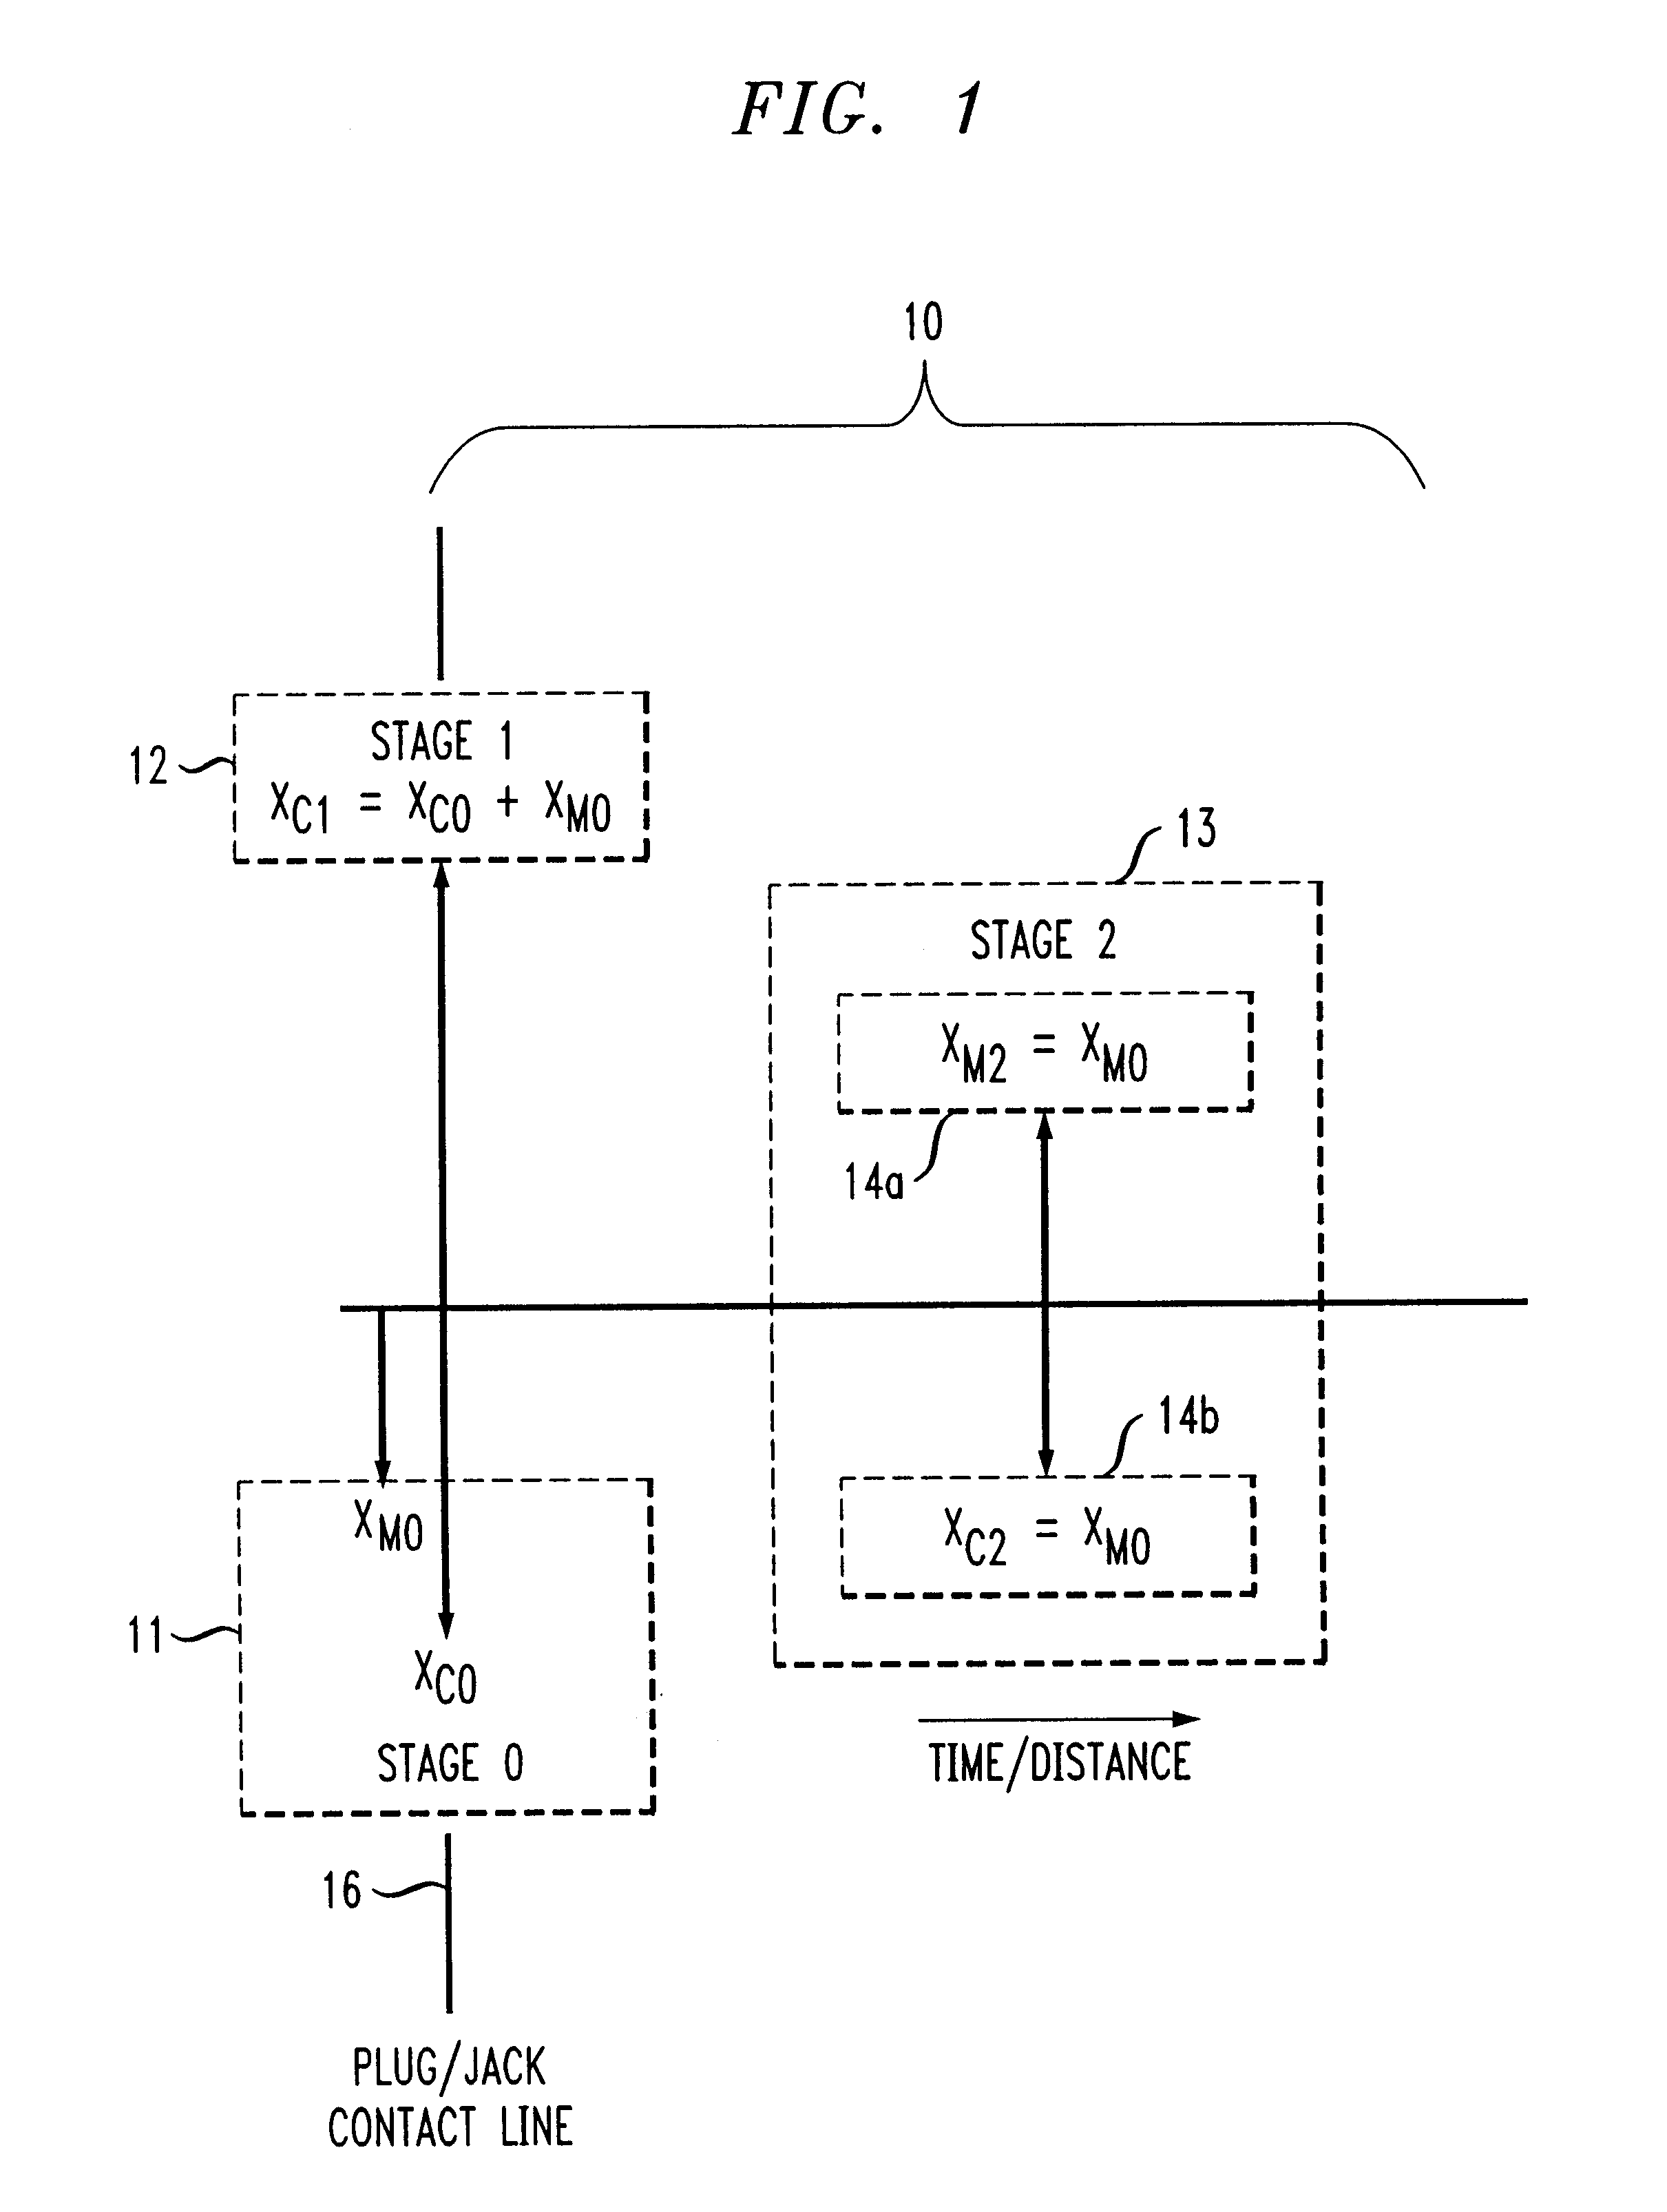 Simultaneous near-end and far-end crosstalk compensation in a communication connector